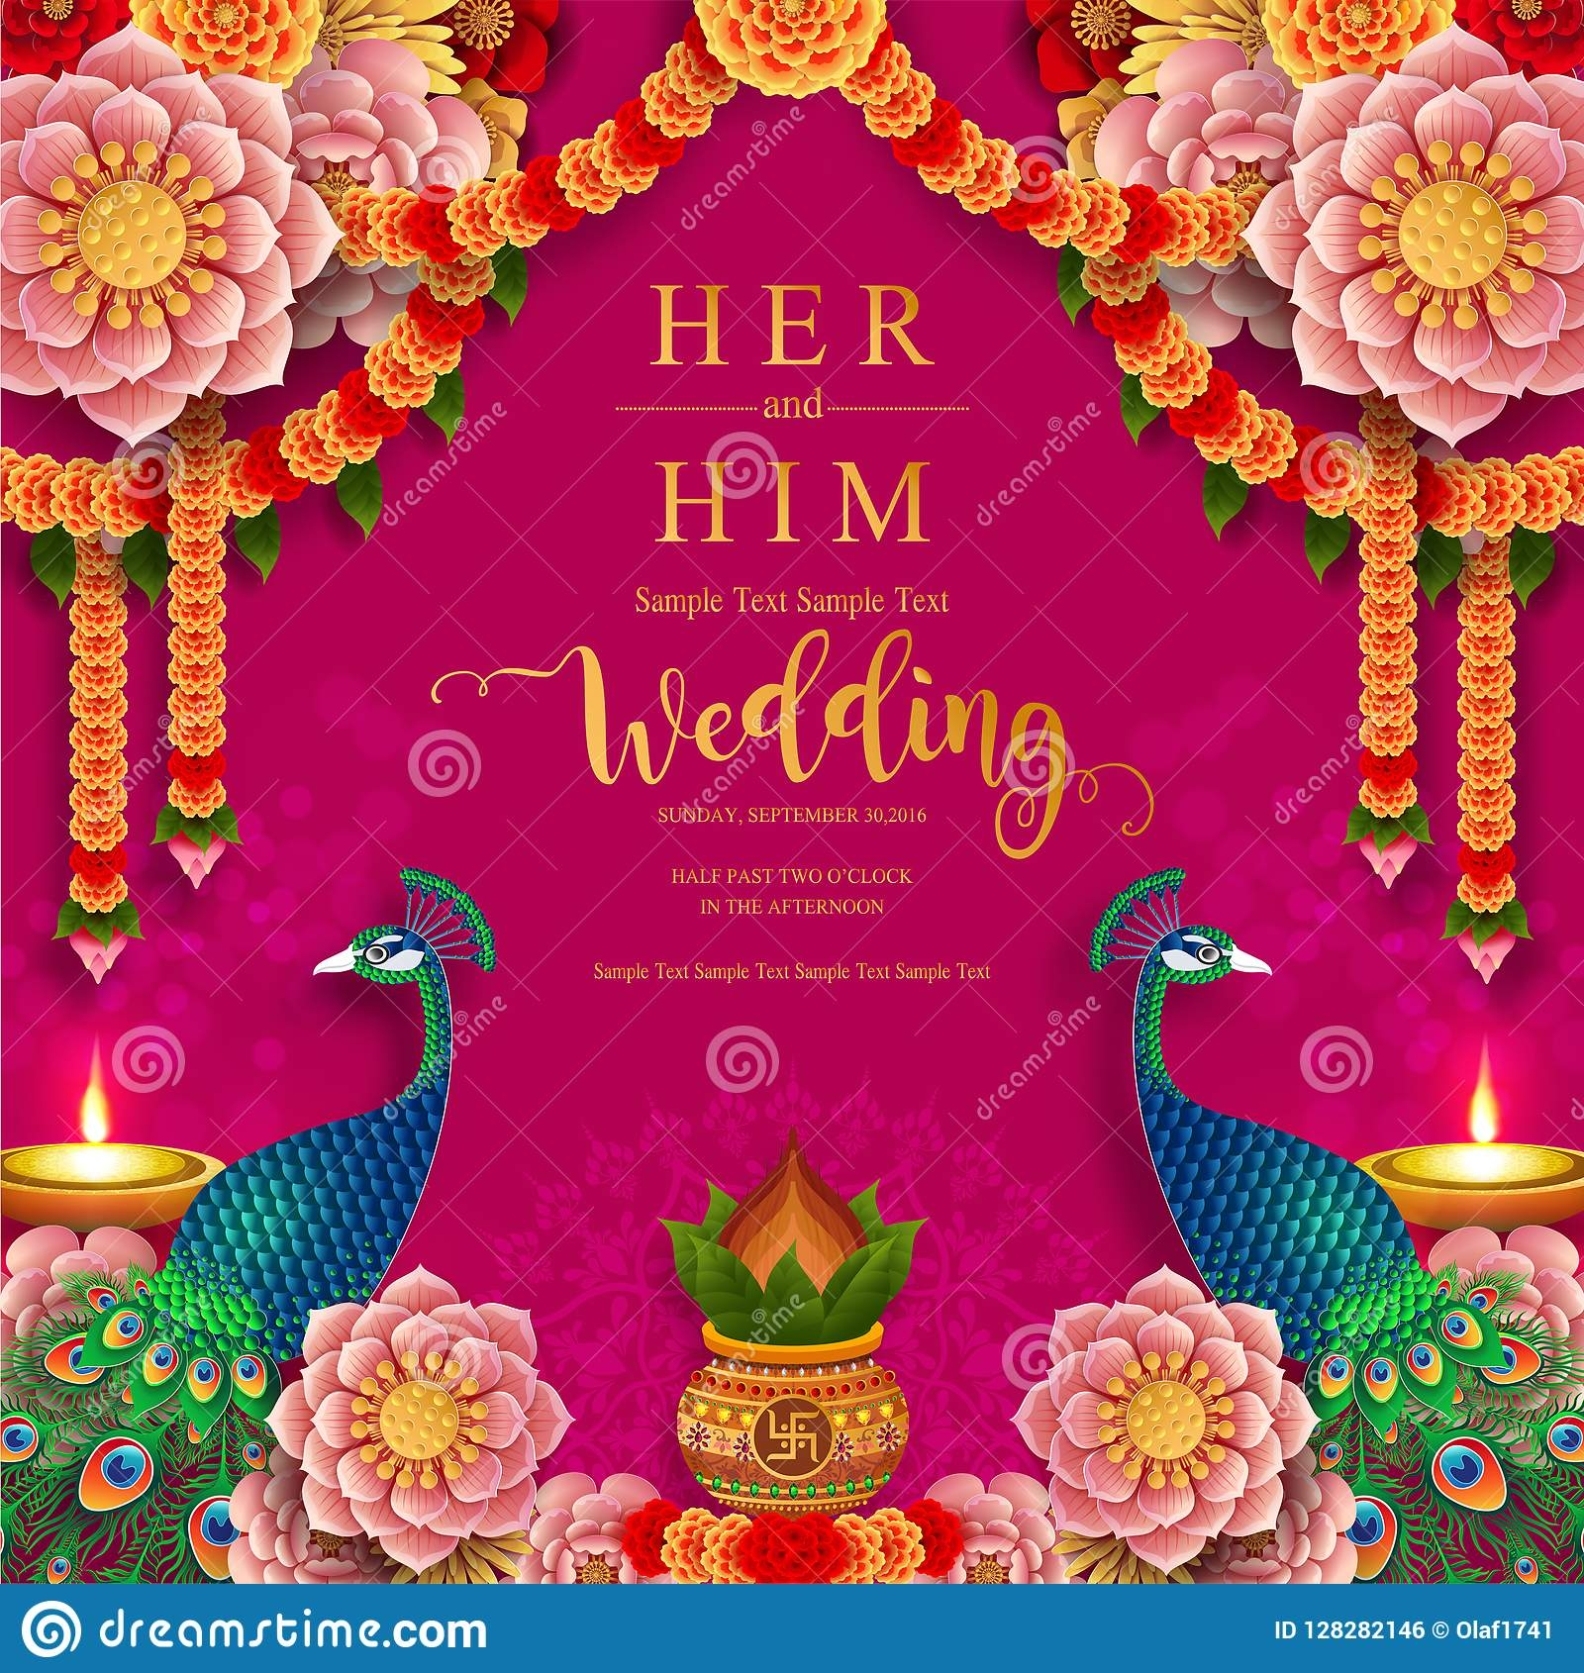 Indian Wedding Invitation Carddian Wedding Invitation Card Templates With Gold Patterned And Throughout Indian Wedding Cards Design Templates